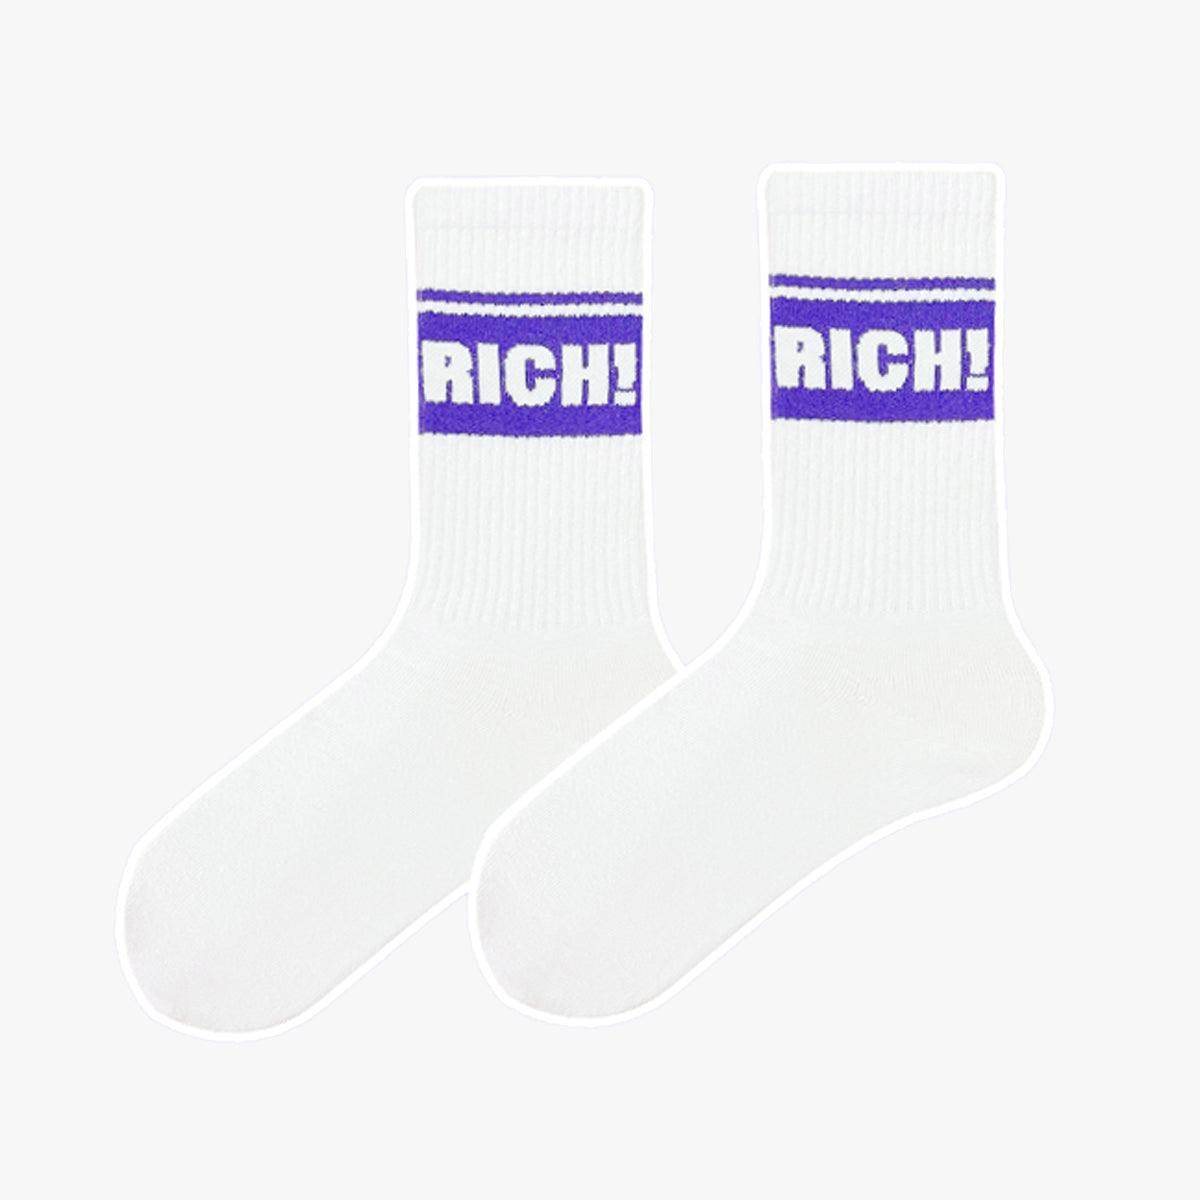 Rich Rich Aesthetic Socks - Aesthetic Clothes Shop